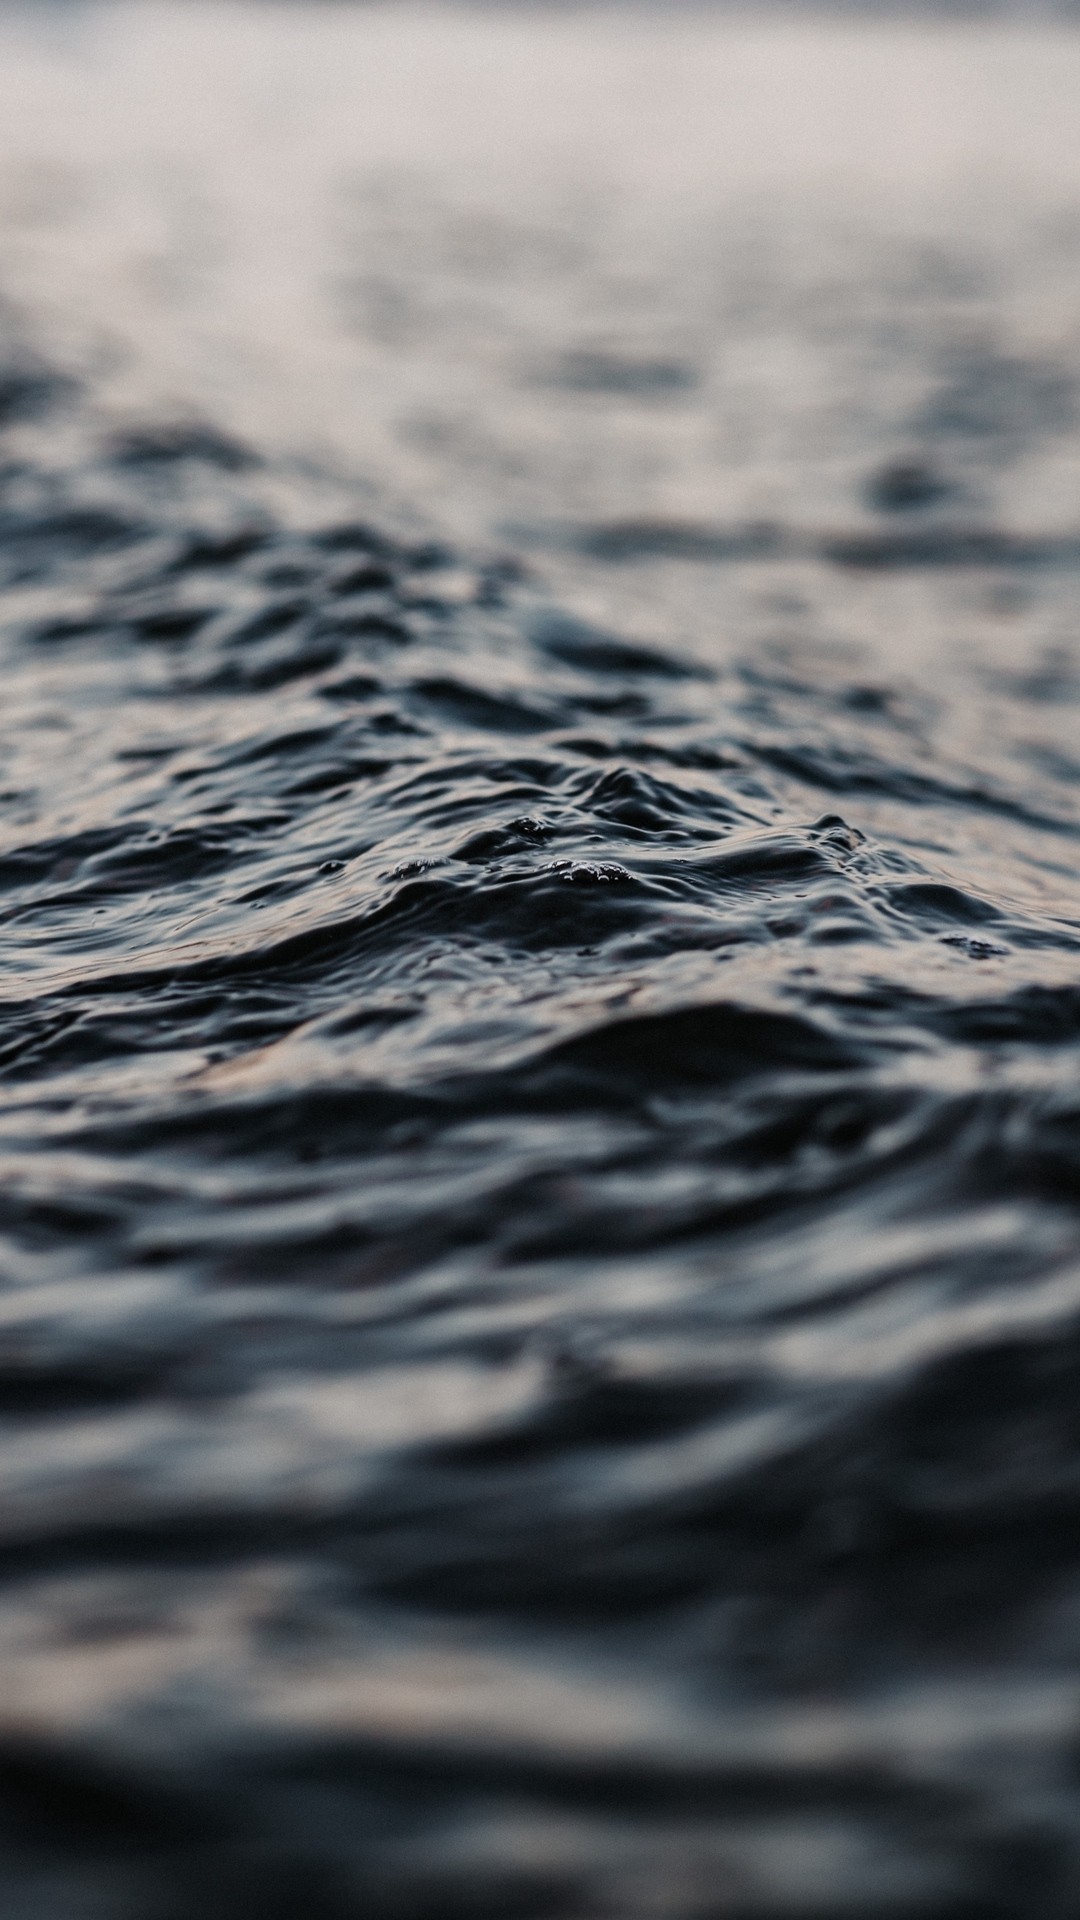 Water wallpaper for android